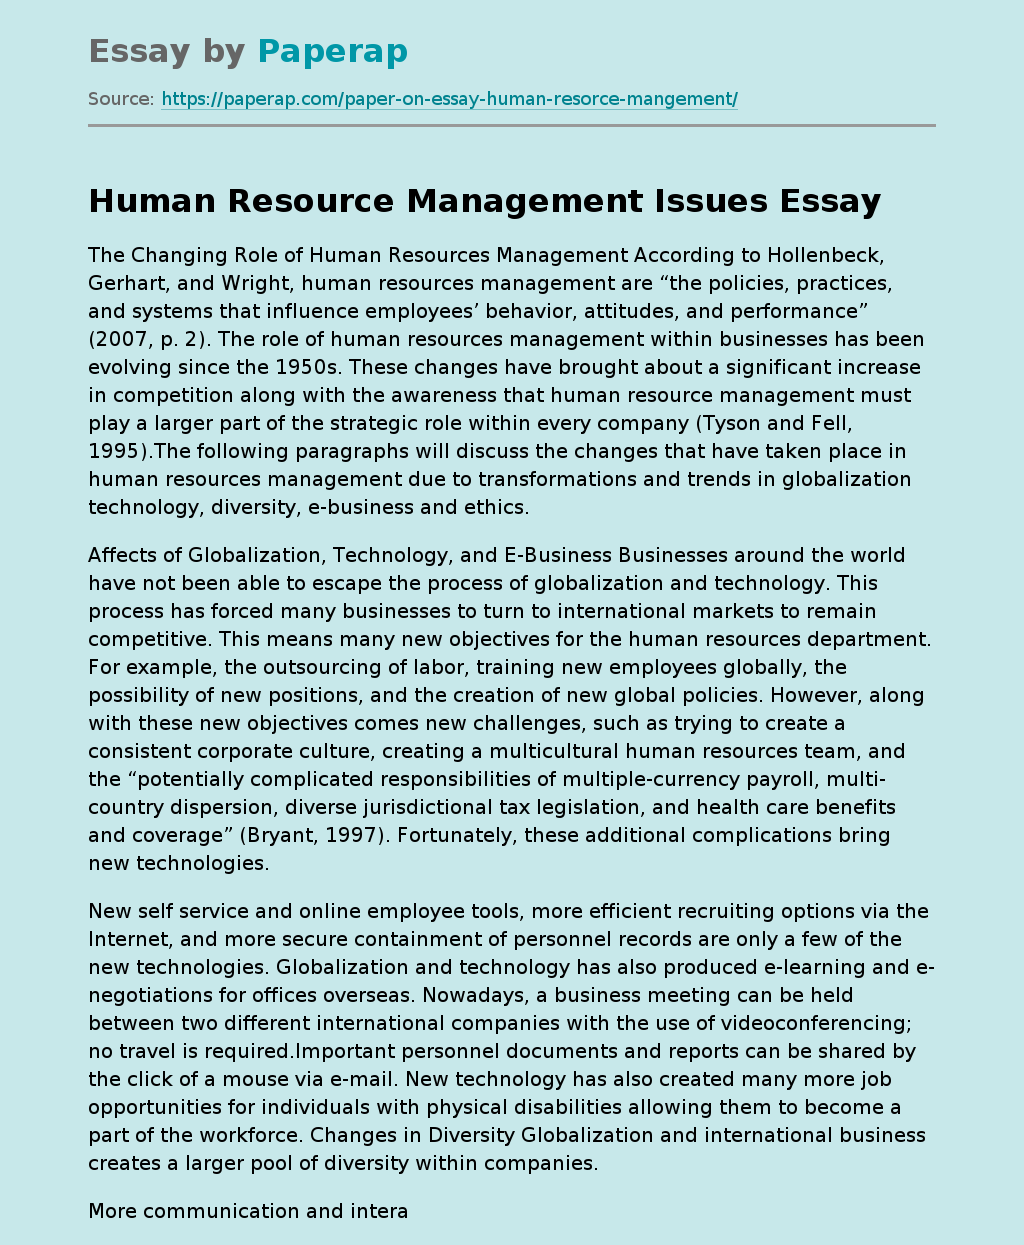 Human Resource Management Issues